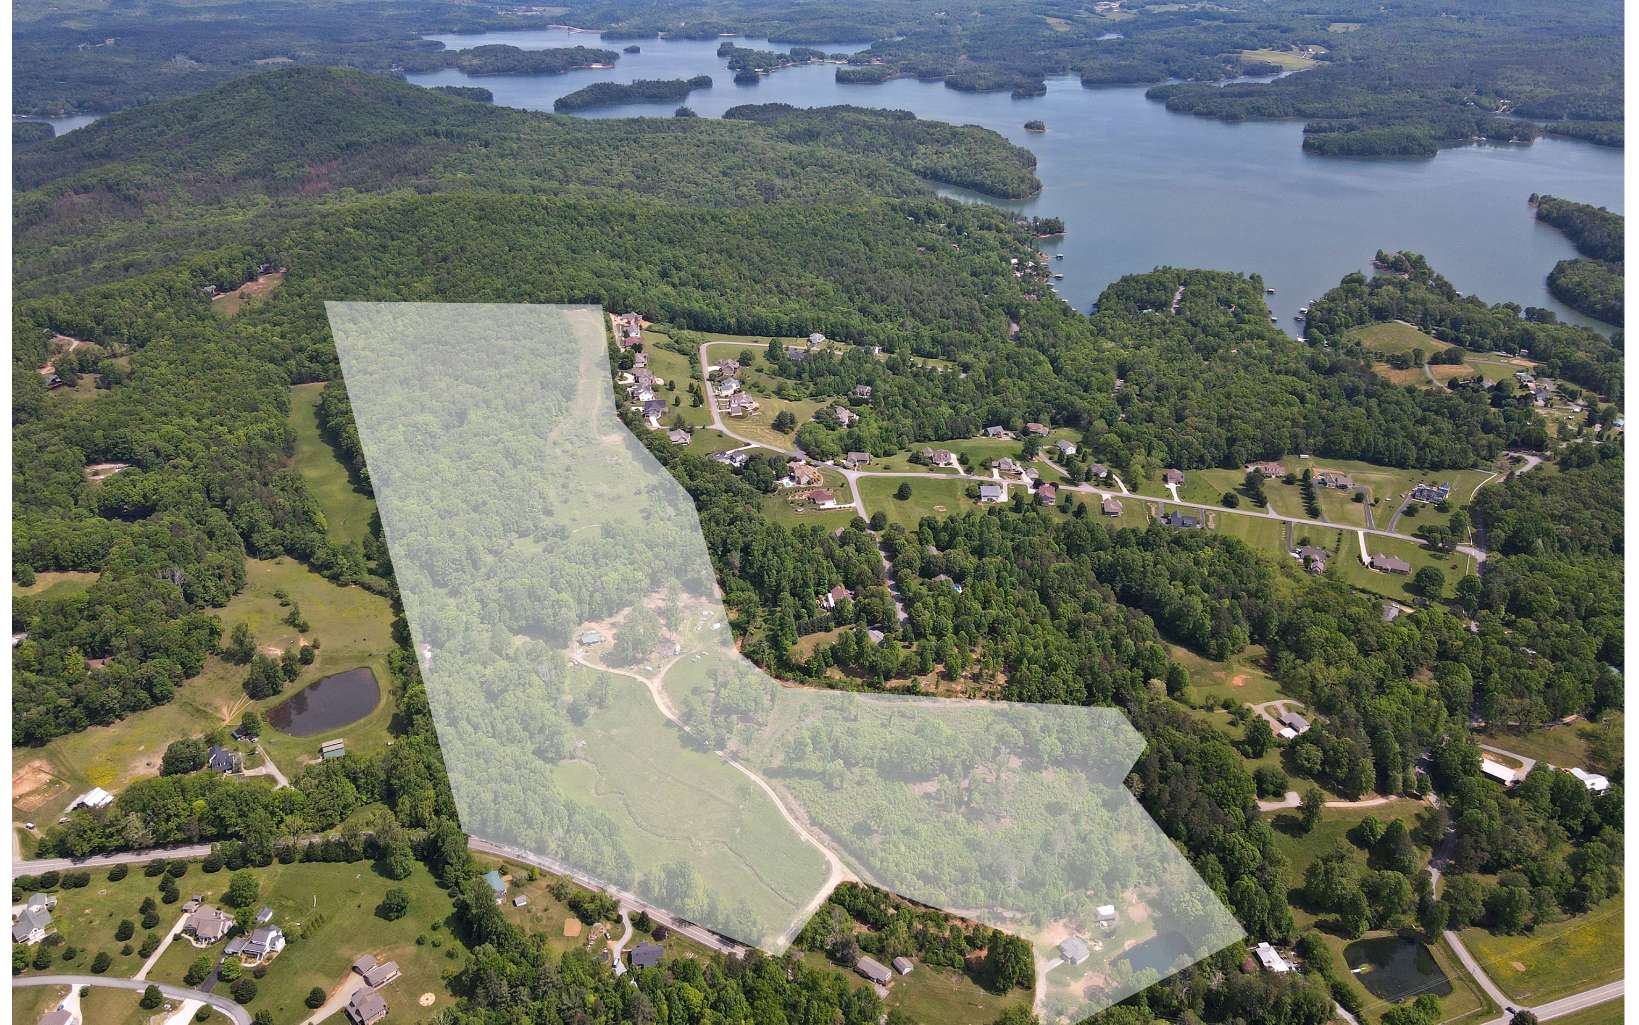 INVESTORS WANTED! Come see this Beautiful 58 acre farm in the heart of the north Georgia mountains. Mountain and lake VIEWS, creek, and a pond, this property is second to none! beautiful 50 mature Chinese chestnut tree orchard, apple trees, blackberries and so many other wonderful plants and trees. It boasts opportunity for the ambitious investor or creative home owner. There are two rustic homes on the property. DON'T MISS OUT!